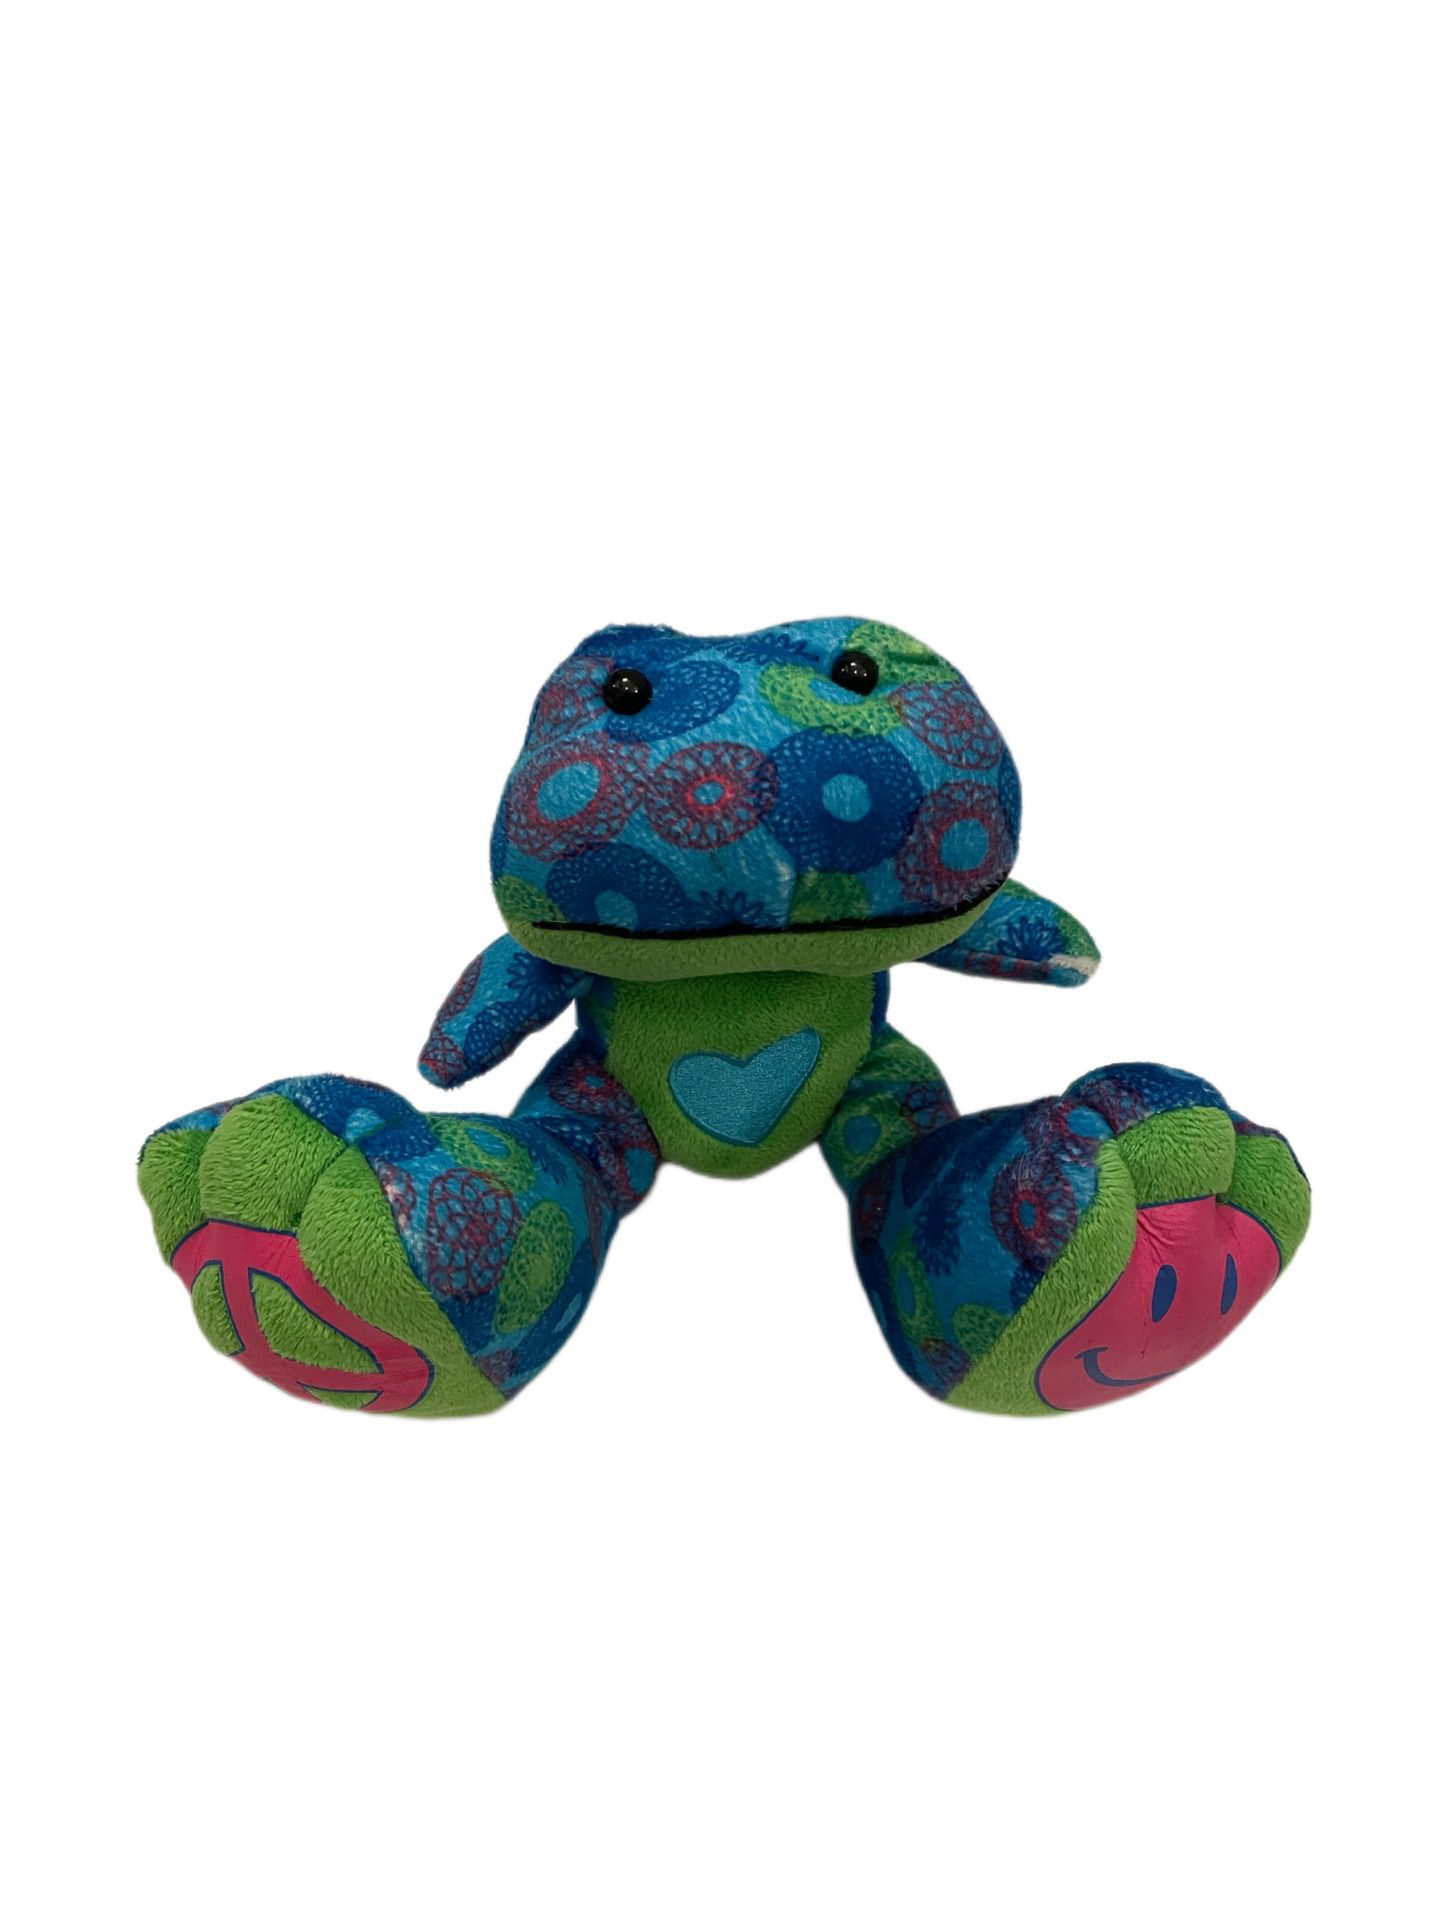 Adorable Plush Psychedelic Peace Frog